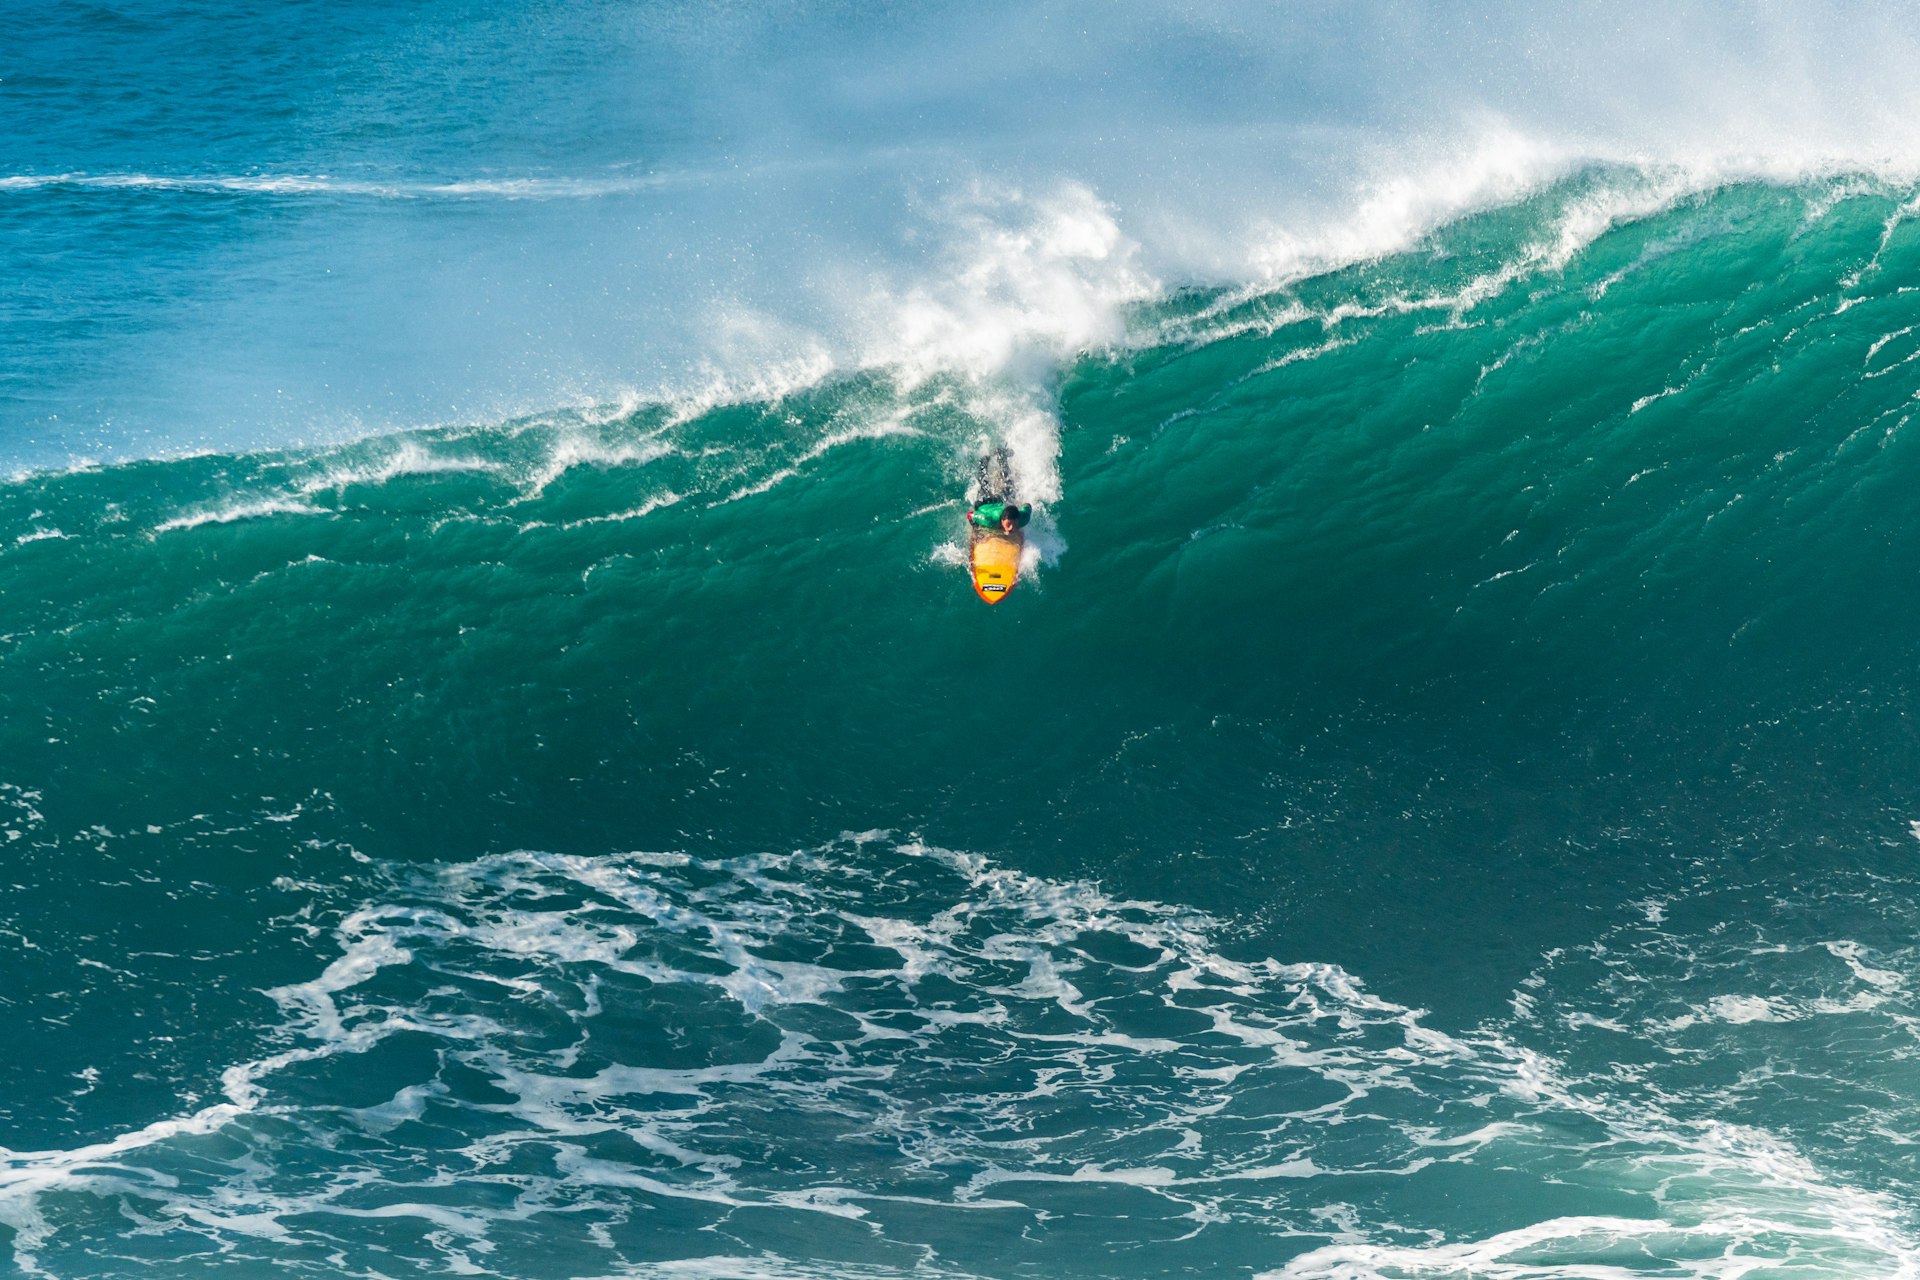 A surfer on a yellow board heads down a giant wave 